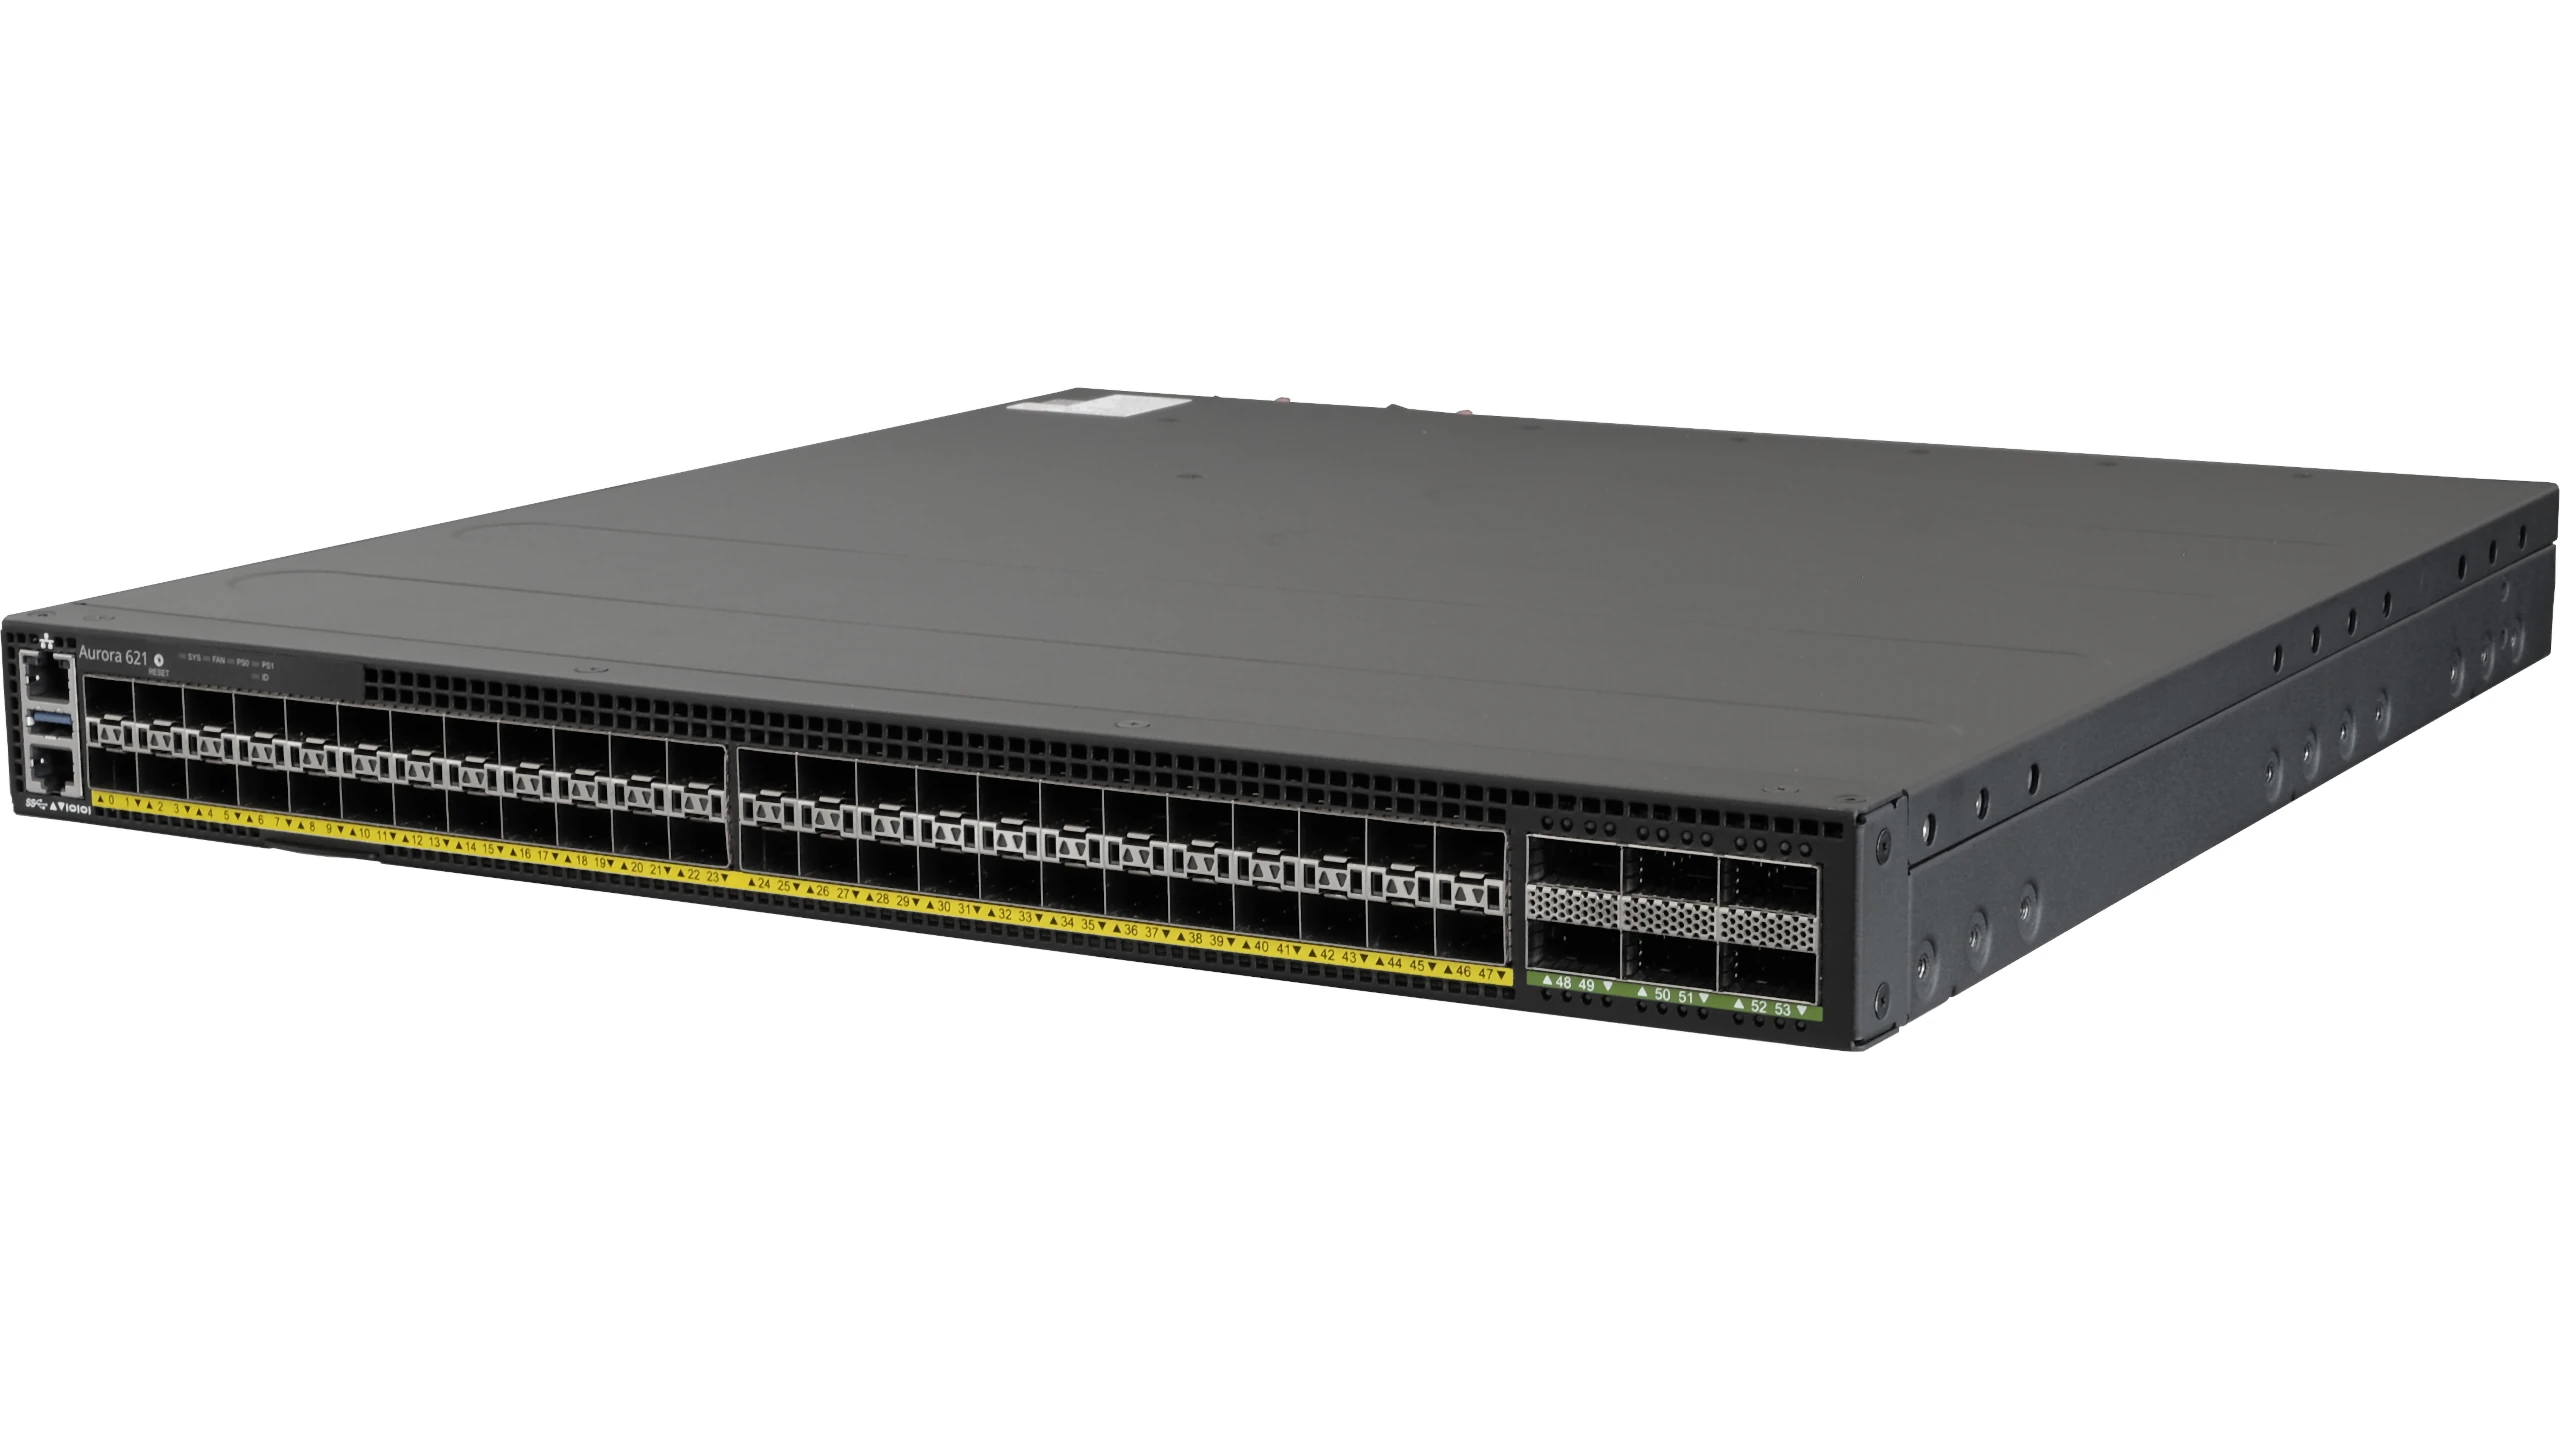 Netberg Aurora 621 48x 25G + 6x 100GE, Broadcom Trident3-X5 Bare Metal Switch for data centers, front angled view